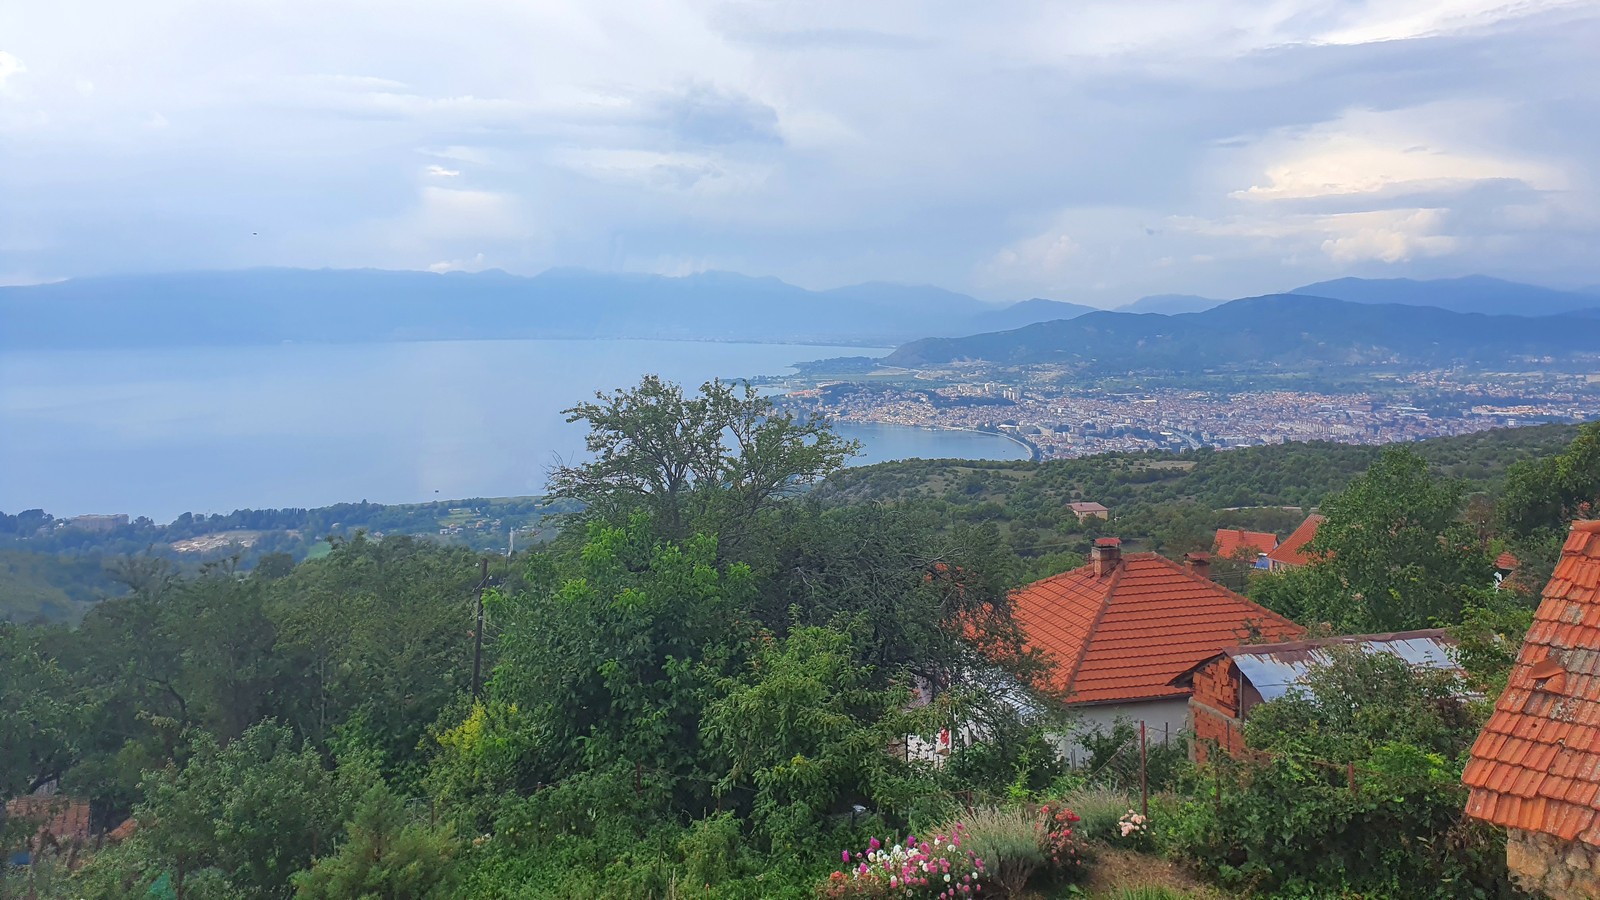 Chapter 34 in which we stay near lake Ohrid and try North Macedonian cuisine